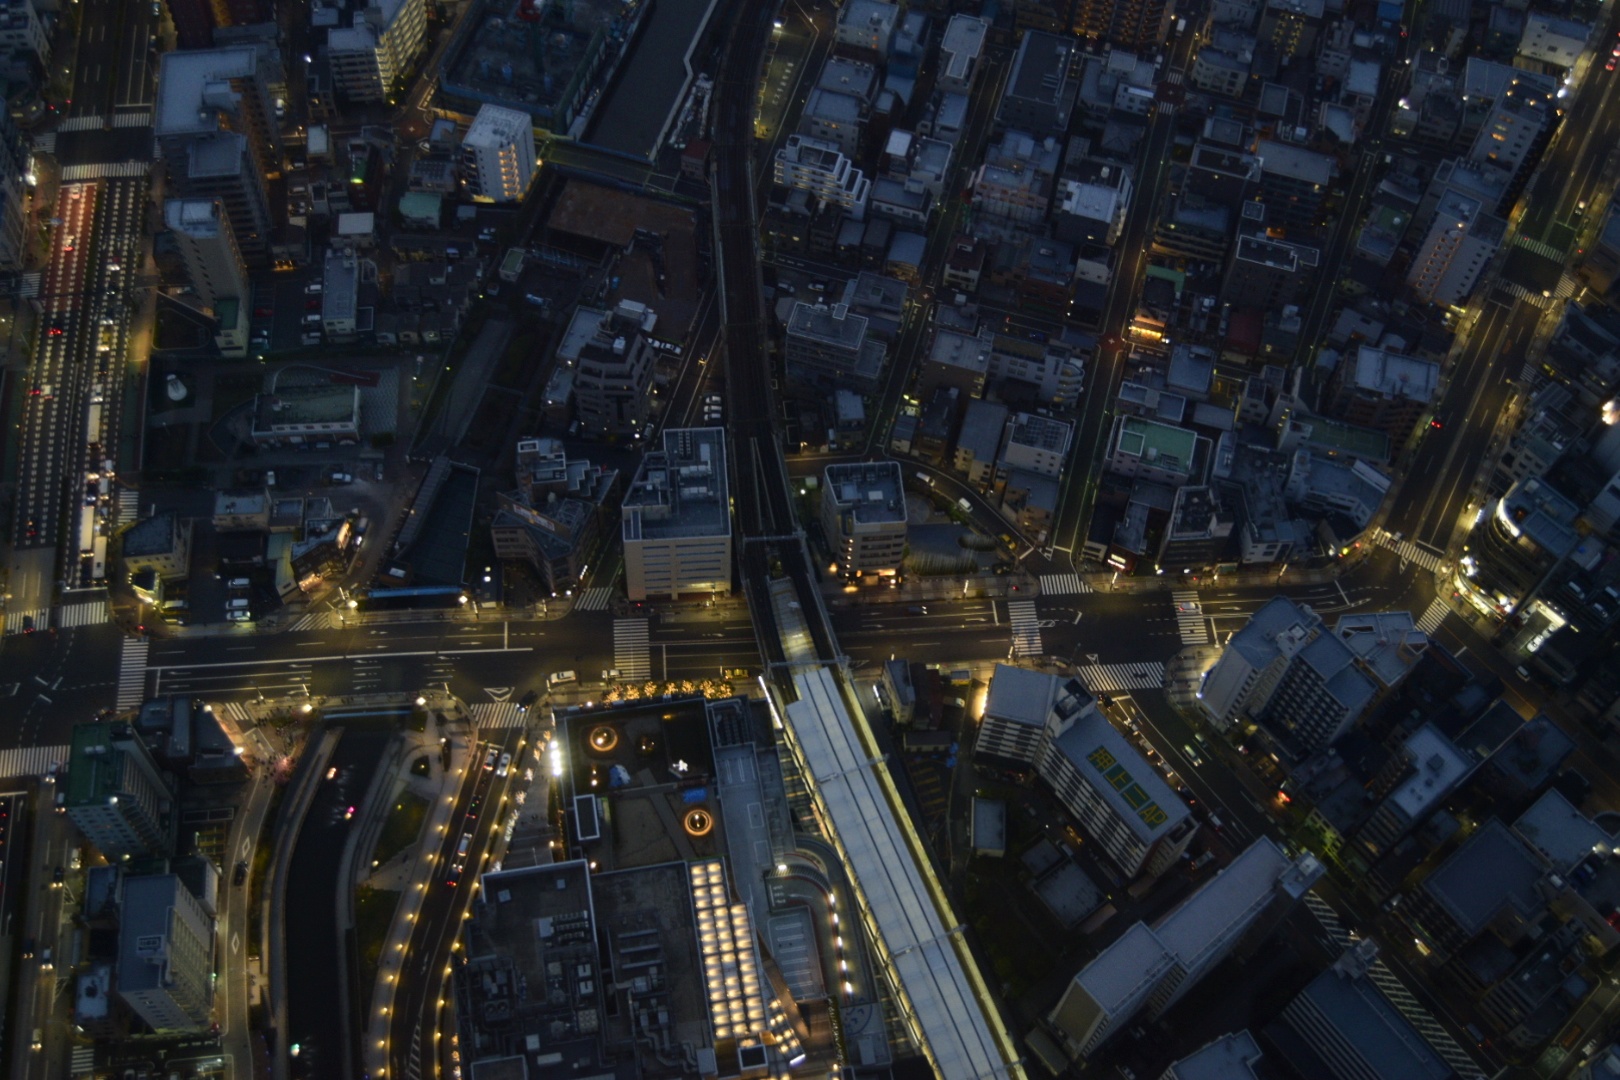 View from Skytree Tower